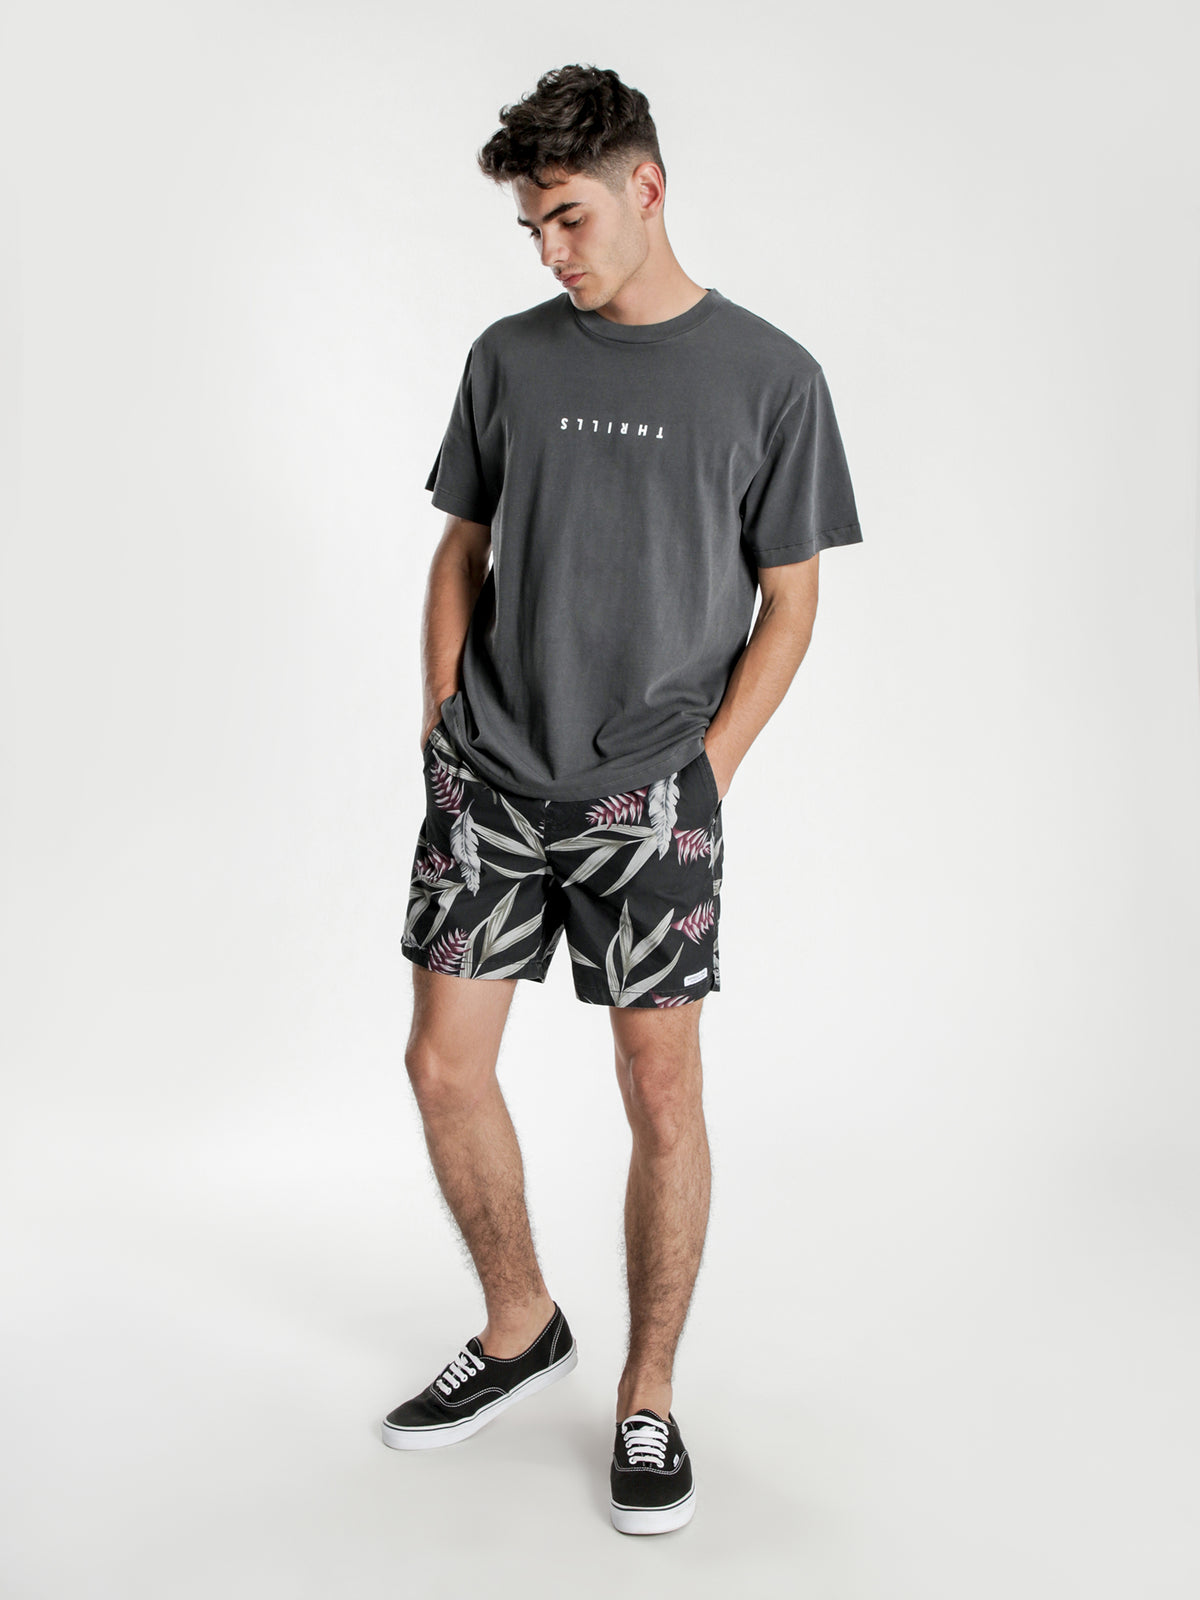 Paradise Beach Shorts in Charcoal